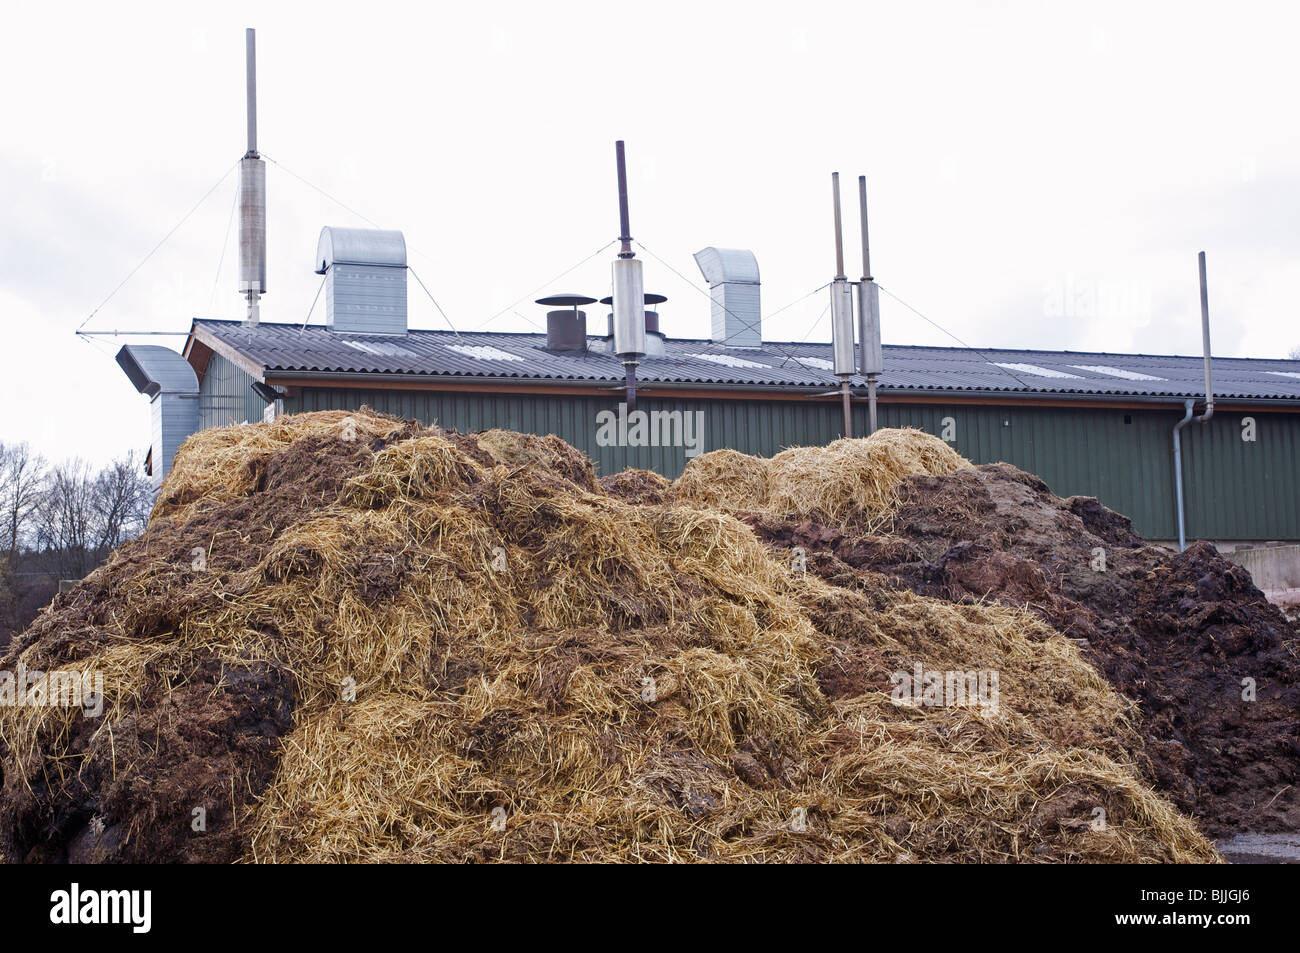 Farm producing biogas from animal waste Stock Photo - Alamy